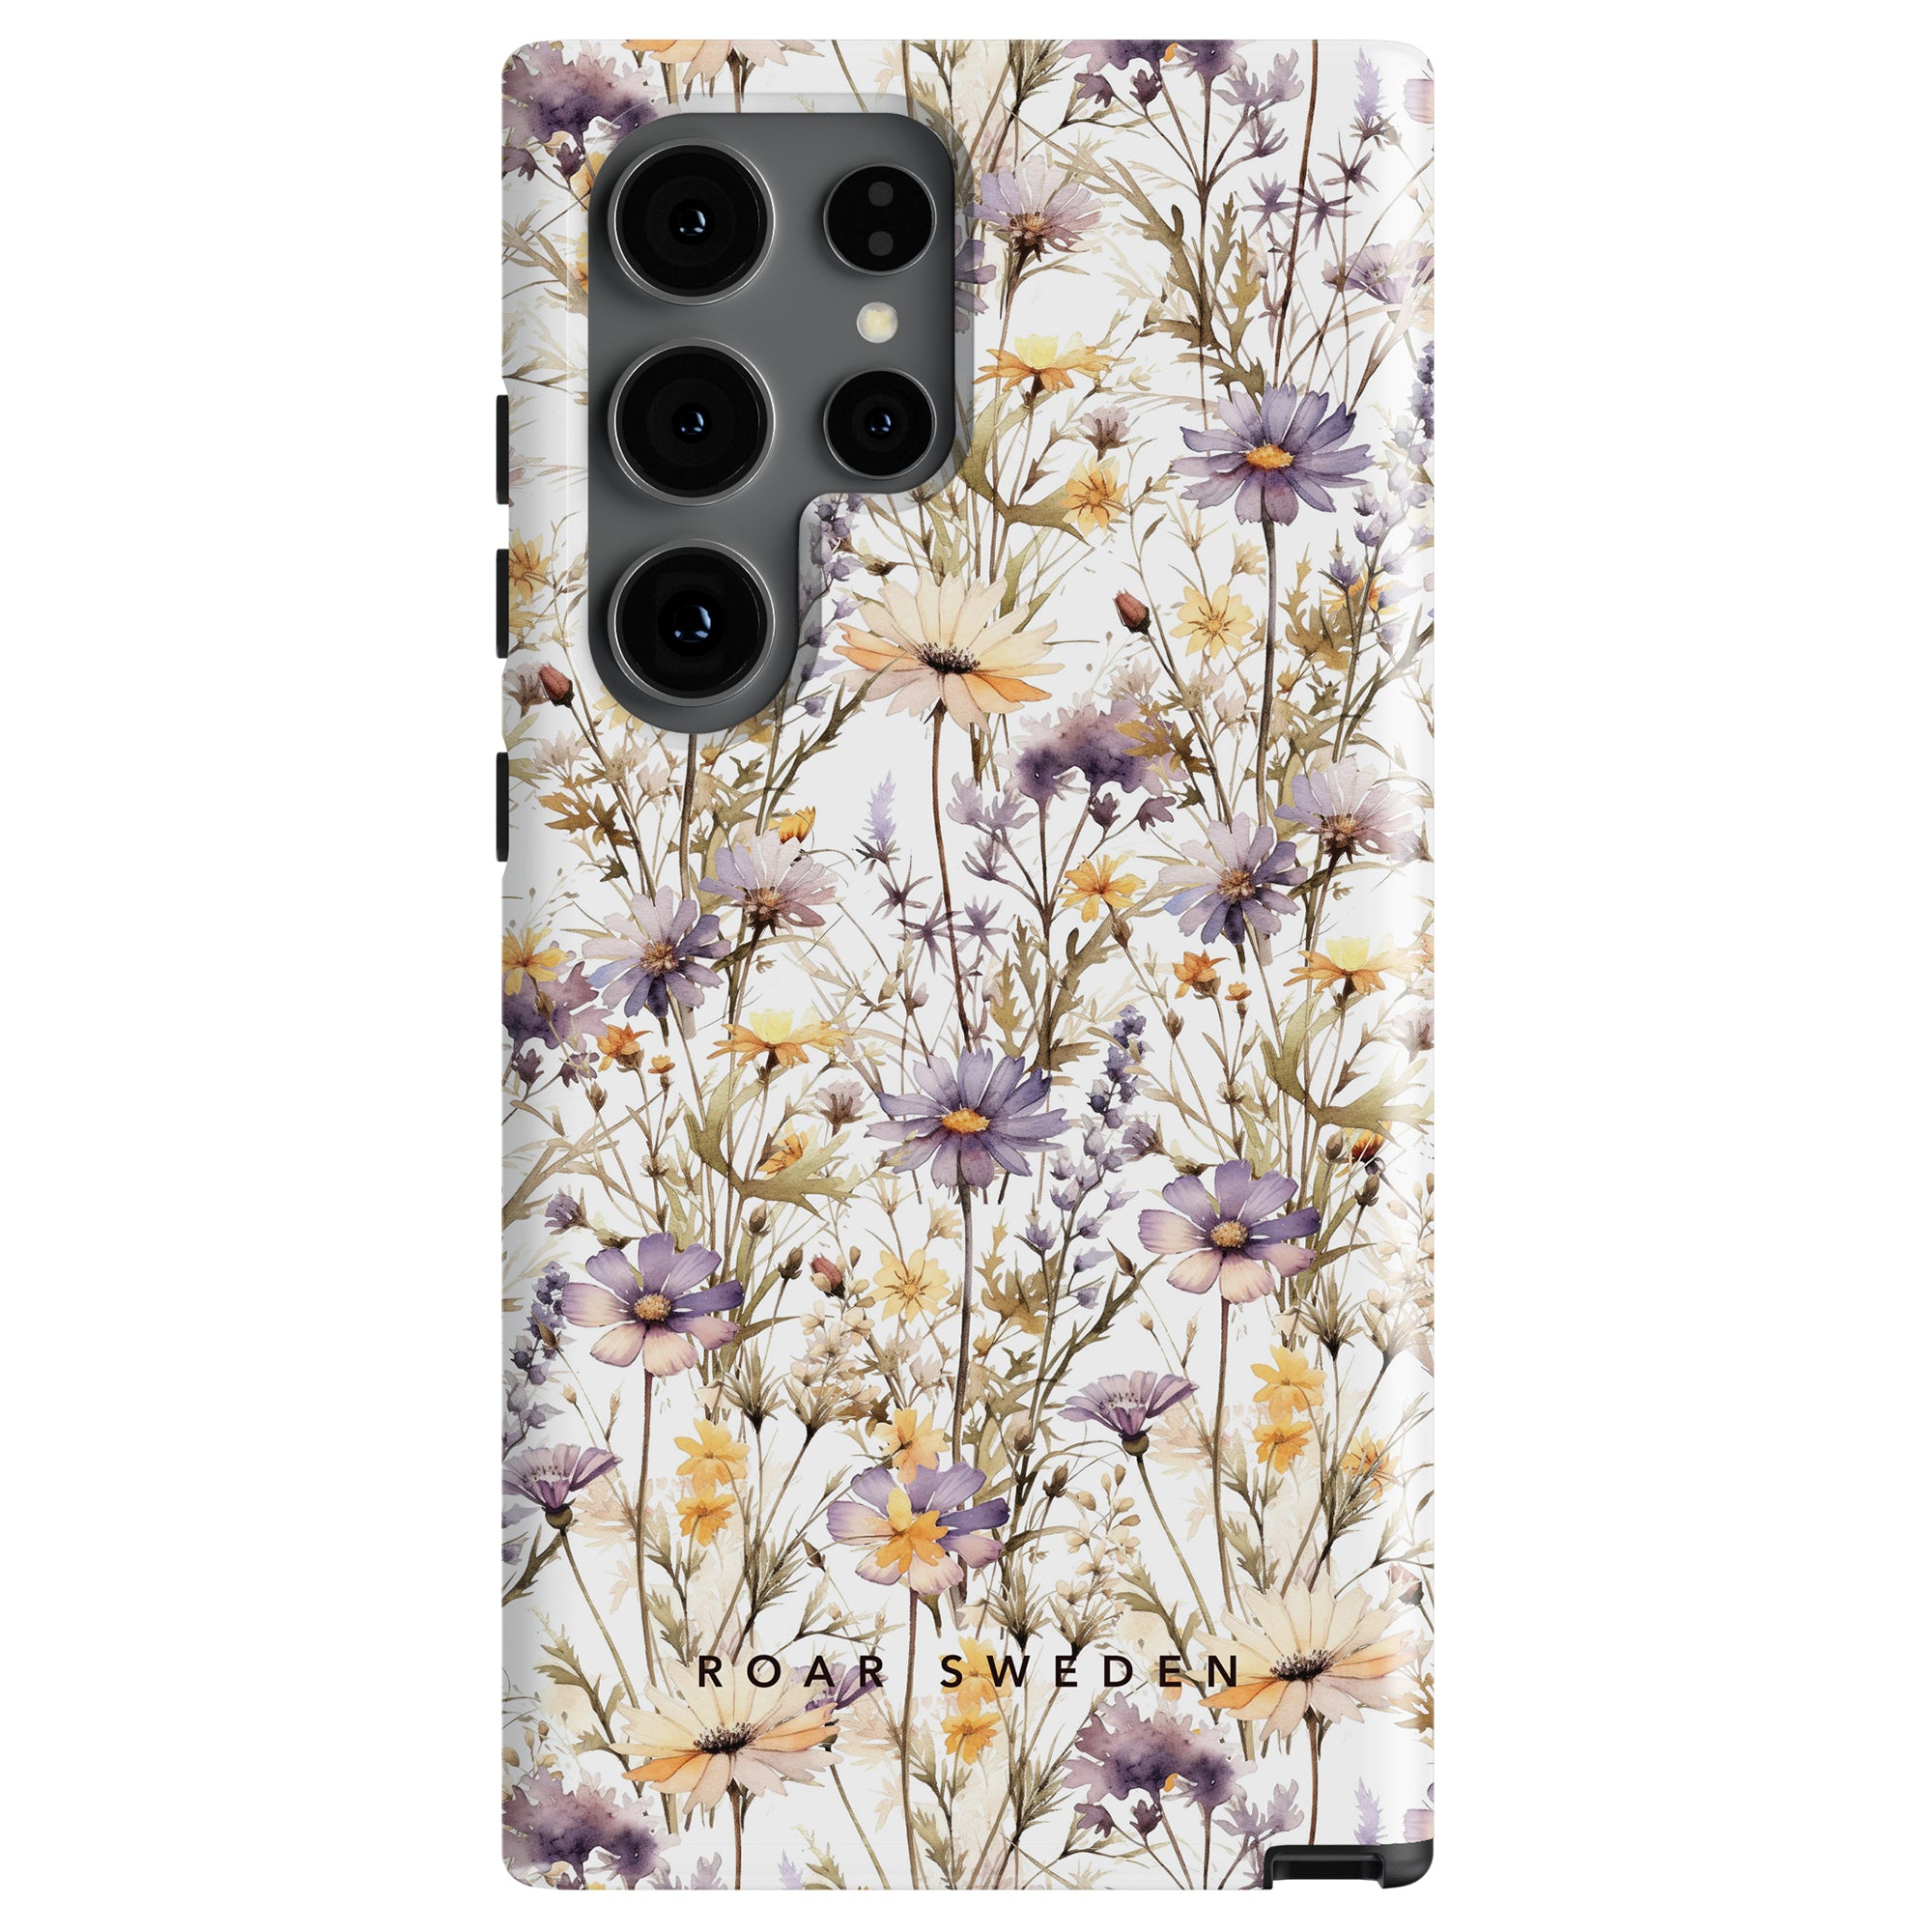 A Purple Wildflower - Tough Case designed with a floral pattern featuring purple wildflowers and yellow flowers. The brand "Roar Sweden" is printed at the bottom.